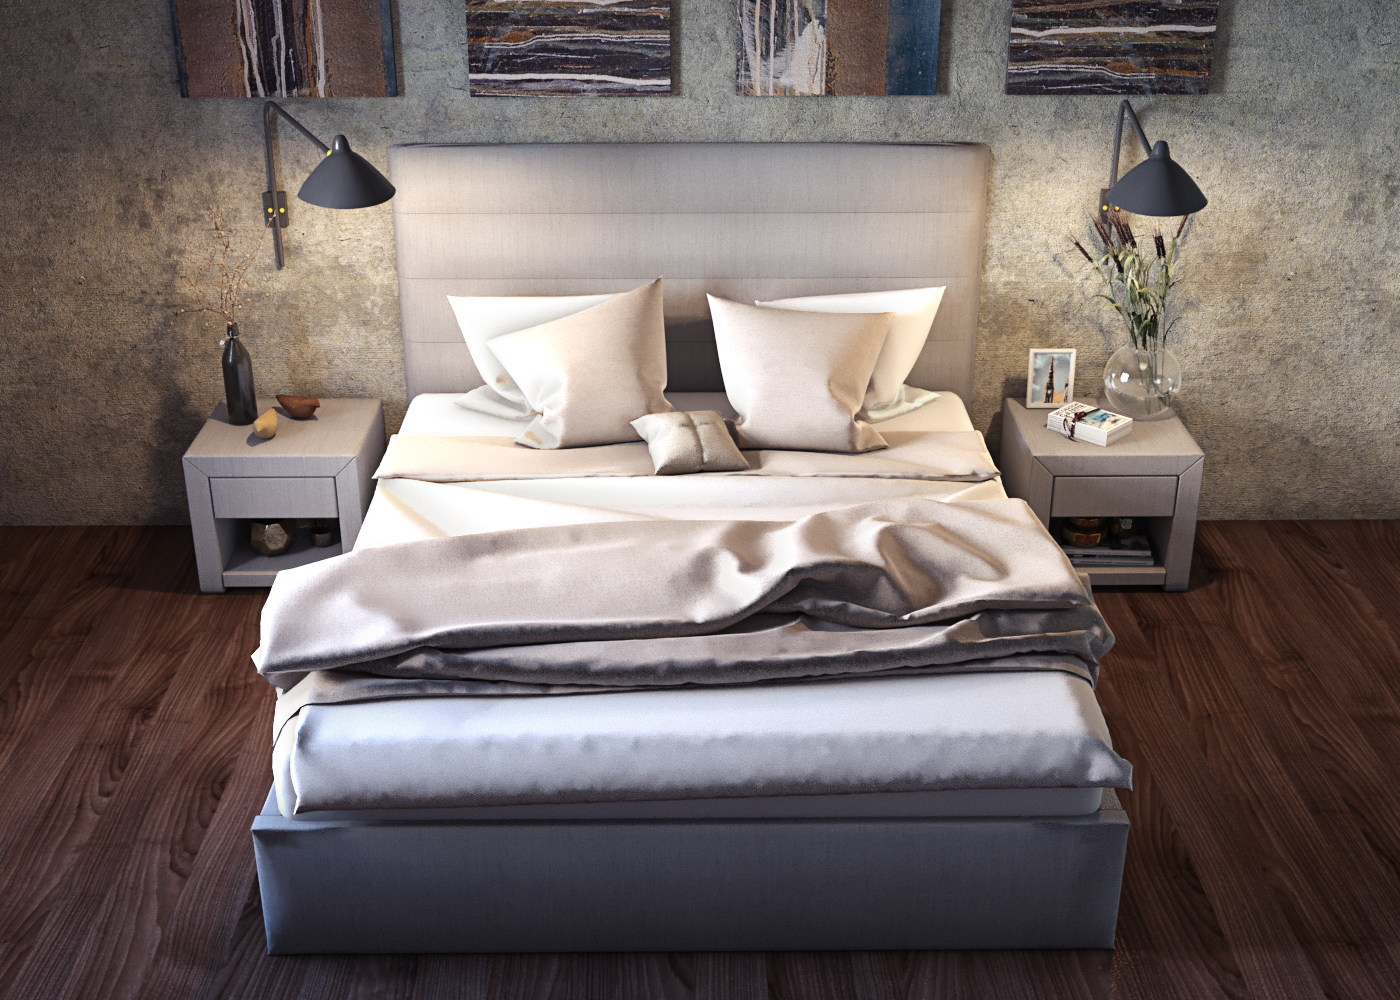 Bed and bedside tables "Opal" in 3d max corona render image